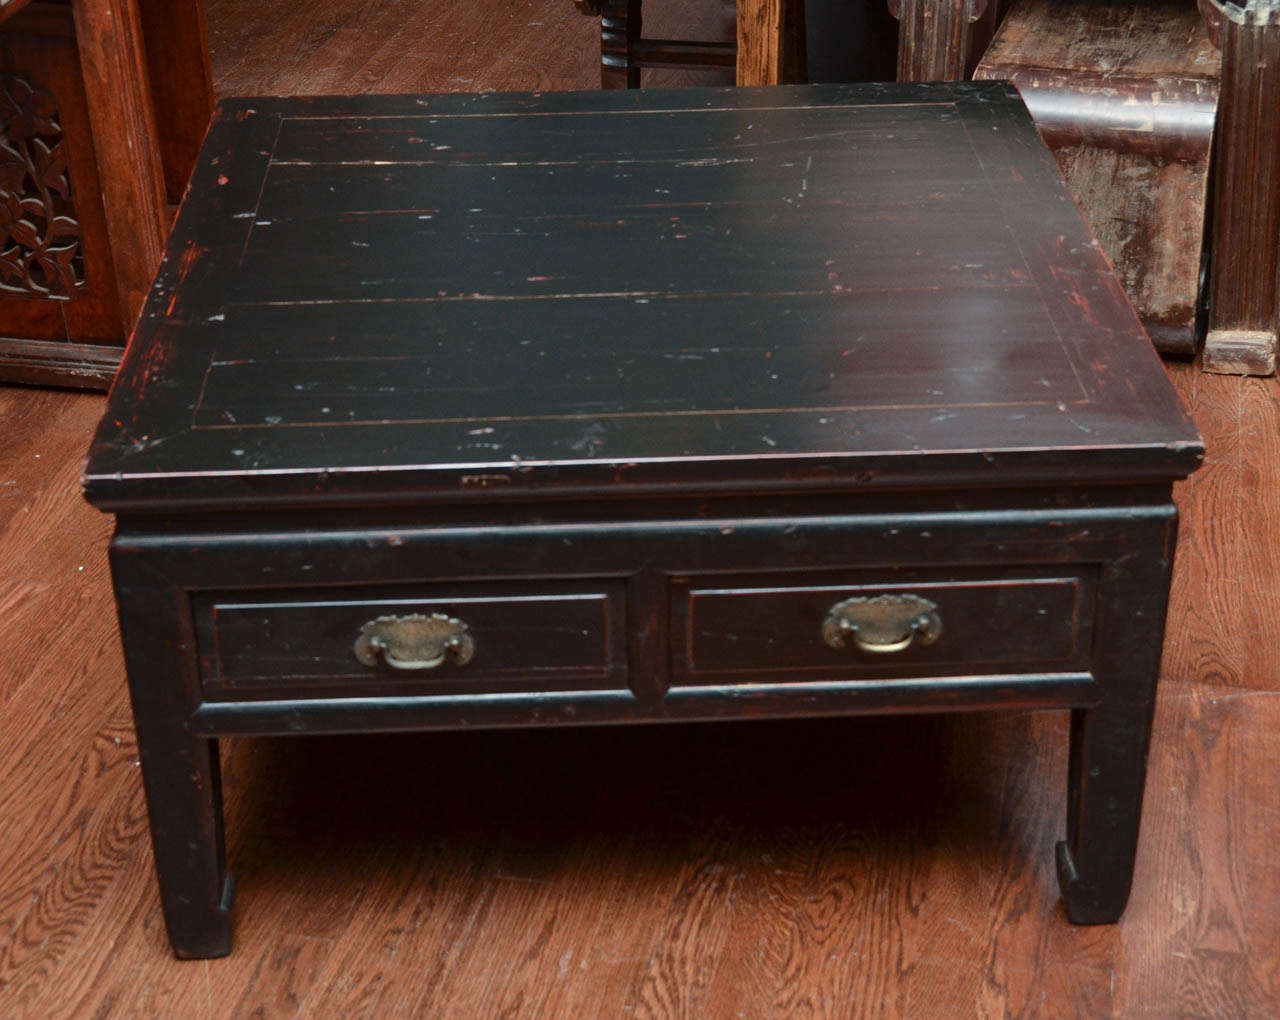 Turn of the century, Qing dynasty Ningbo two-drawer tea table with brass hardware.